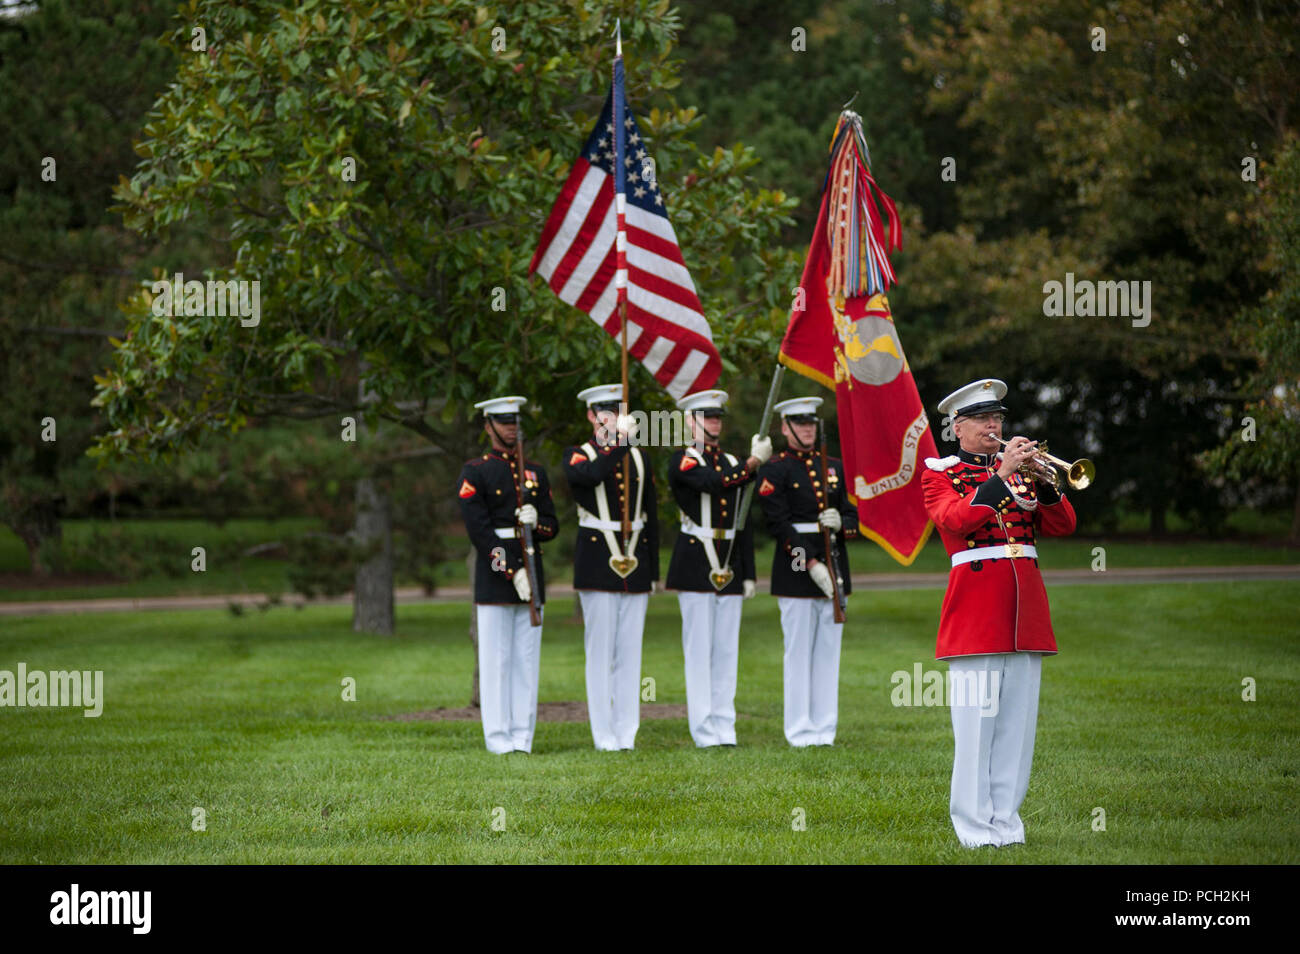 A member from the U.S. Marine Band plays taps during a funeral ceremony at Arlington National Cemetery Oct. 24. The ceremony, supported by Marine Barracks Washington, D.C., was held for a group of six Marines who died in a CH-53 helicopter crash in Afghanistan on January 19, 2012. The deceased are Capt. Daniel Bartle, Capt. Nathan McHone, Master Sgt. Travis Riddick, Cpl. Jesse Stites, Cpl. Kevin Reinhard and Cpl. Joseph Logan. Stock Photo